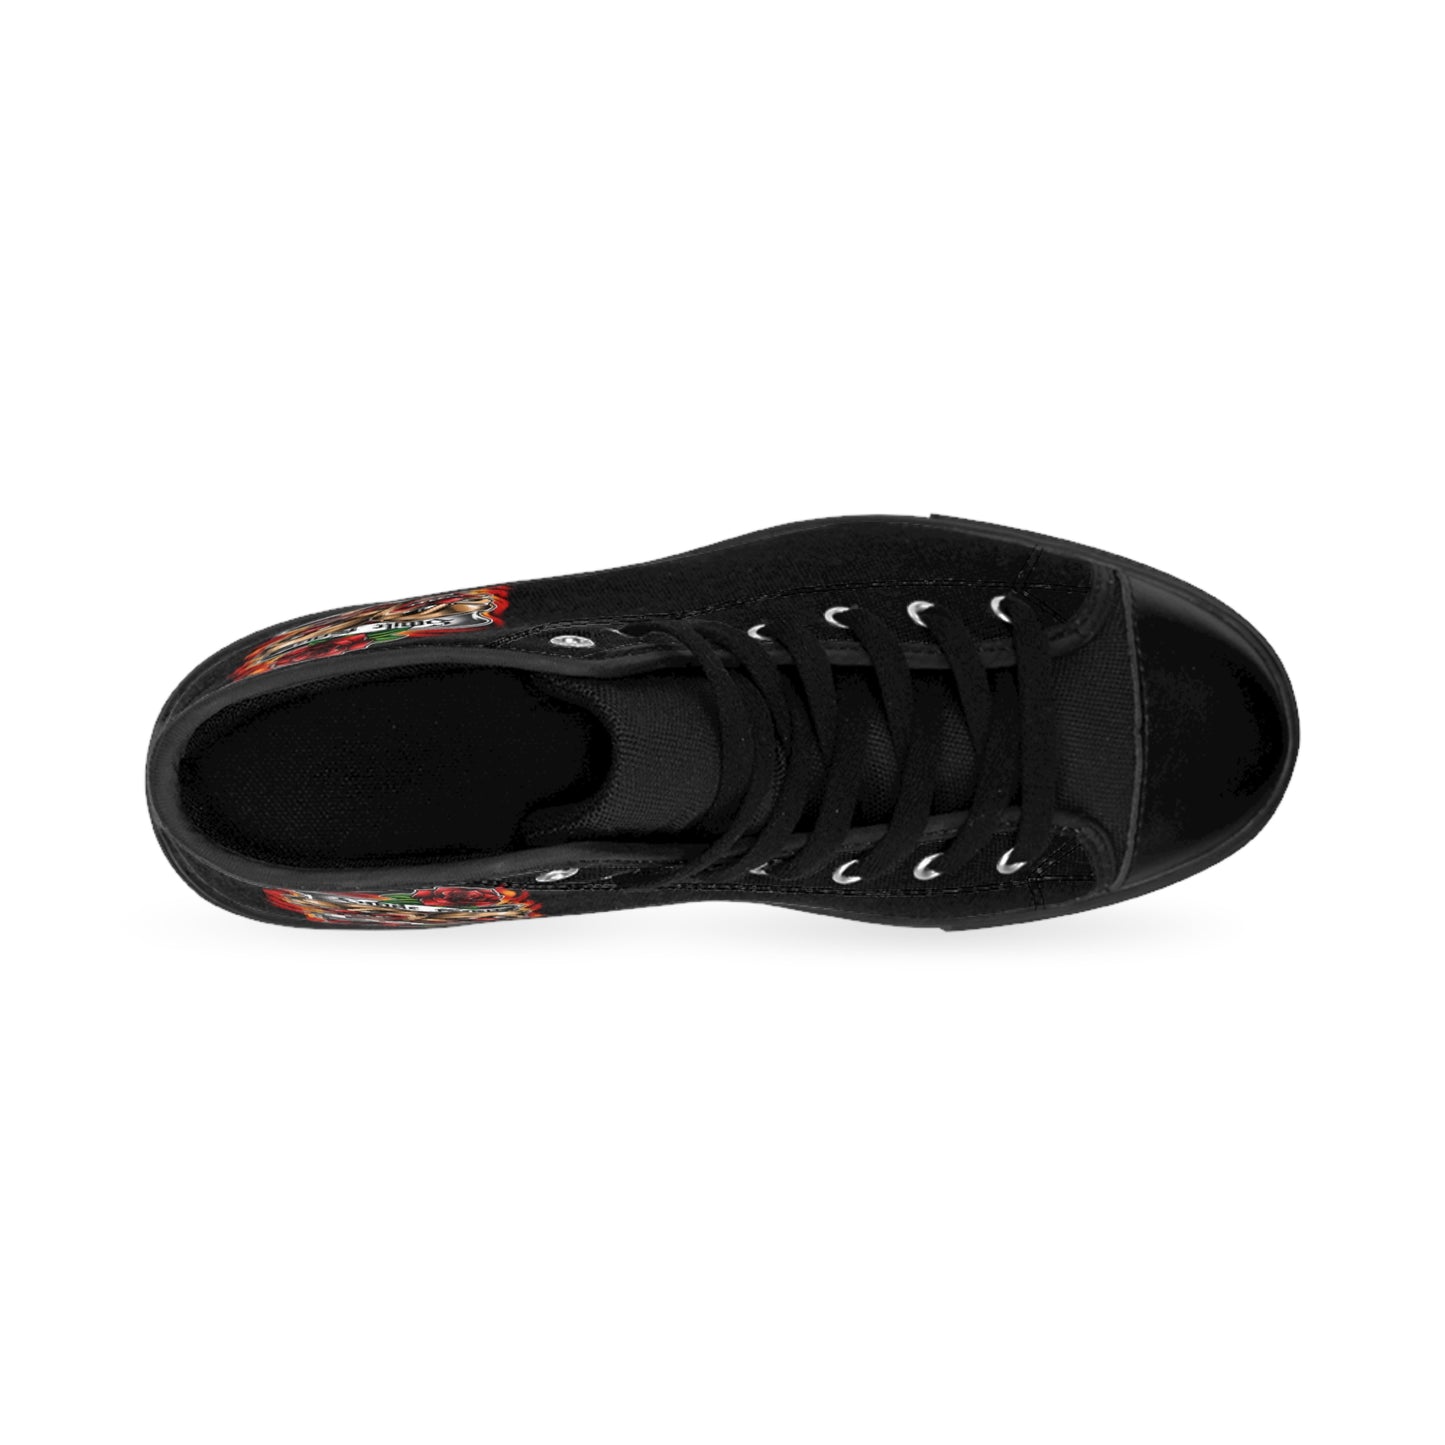 Laugh Now Cry Later Men's Classic Sneakers